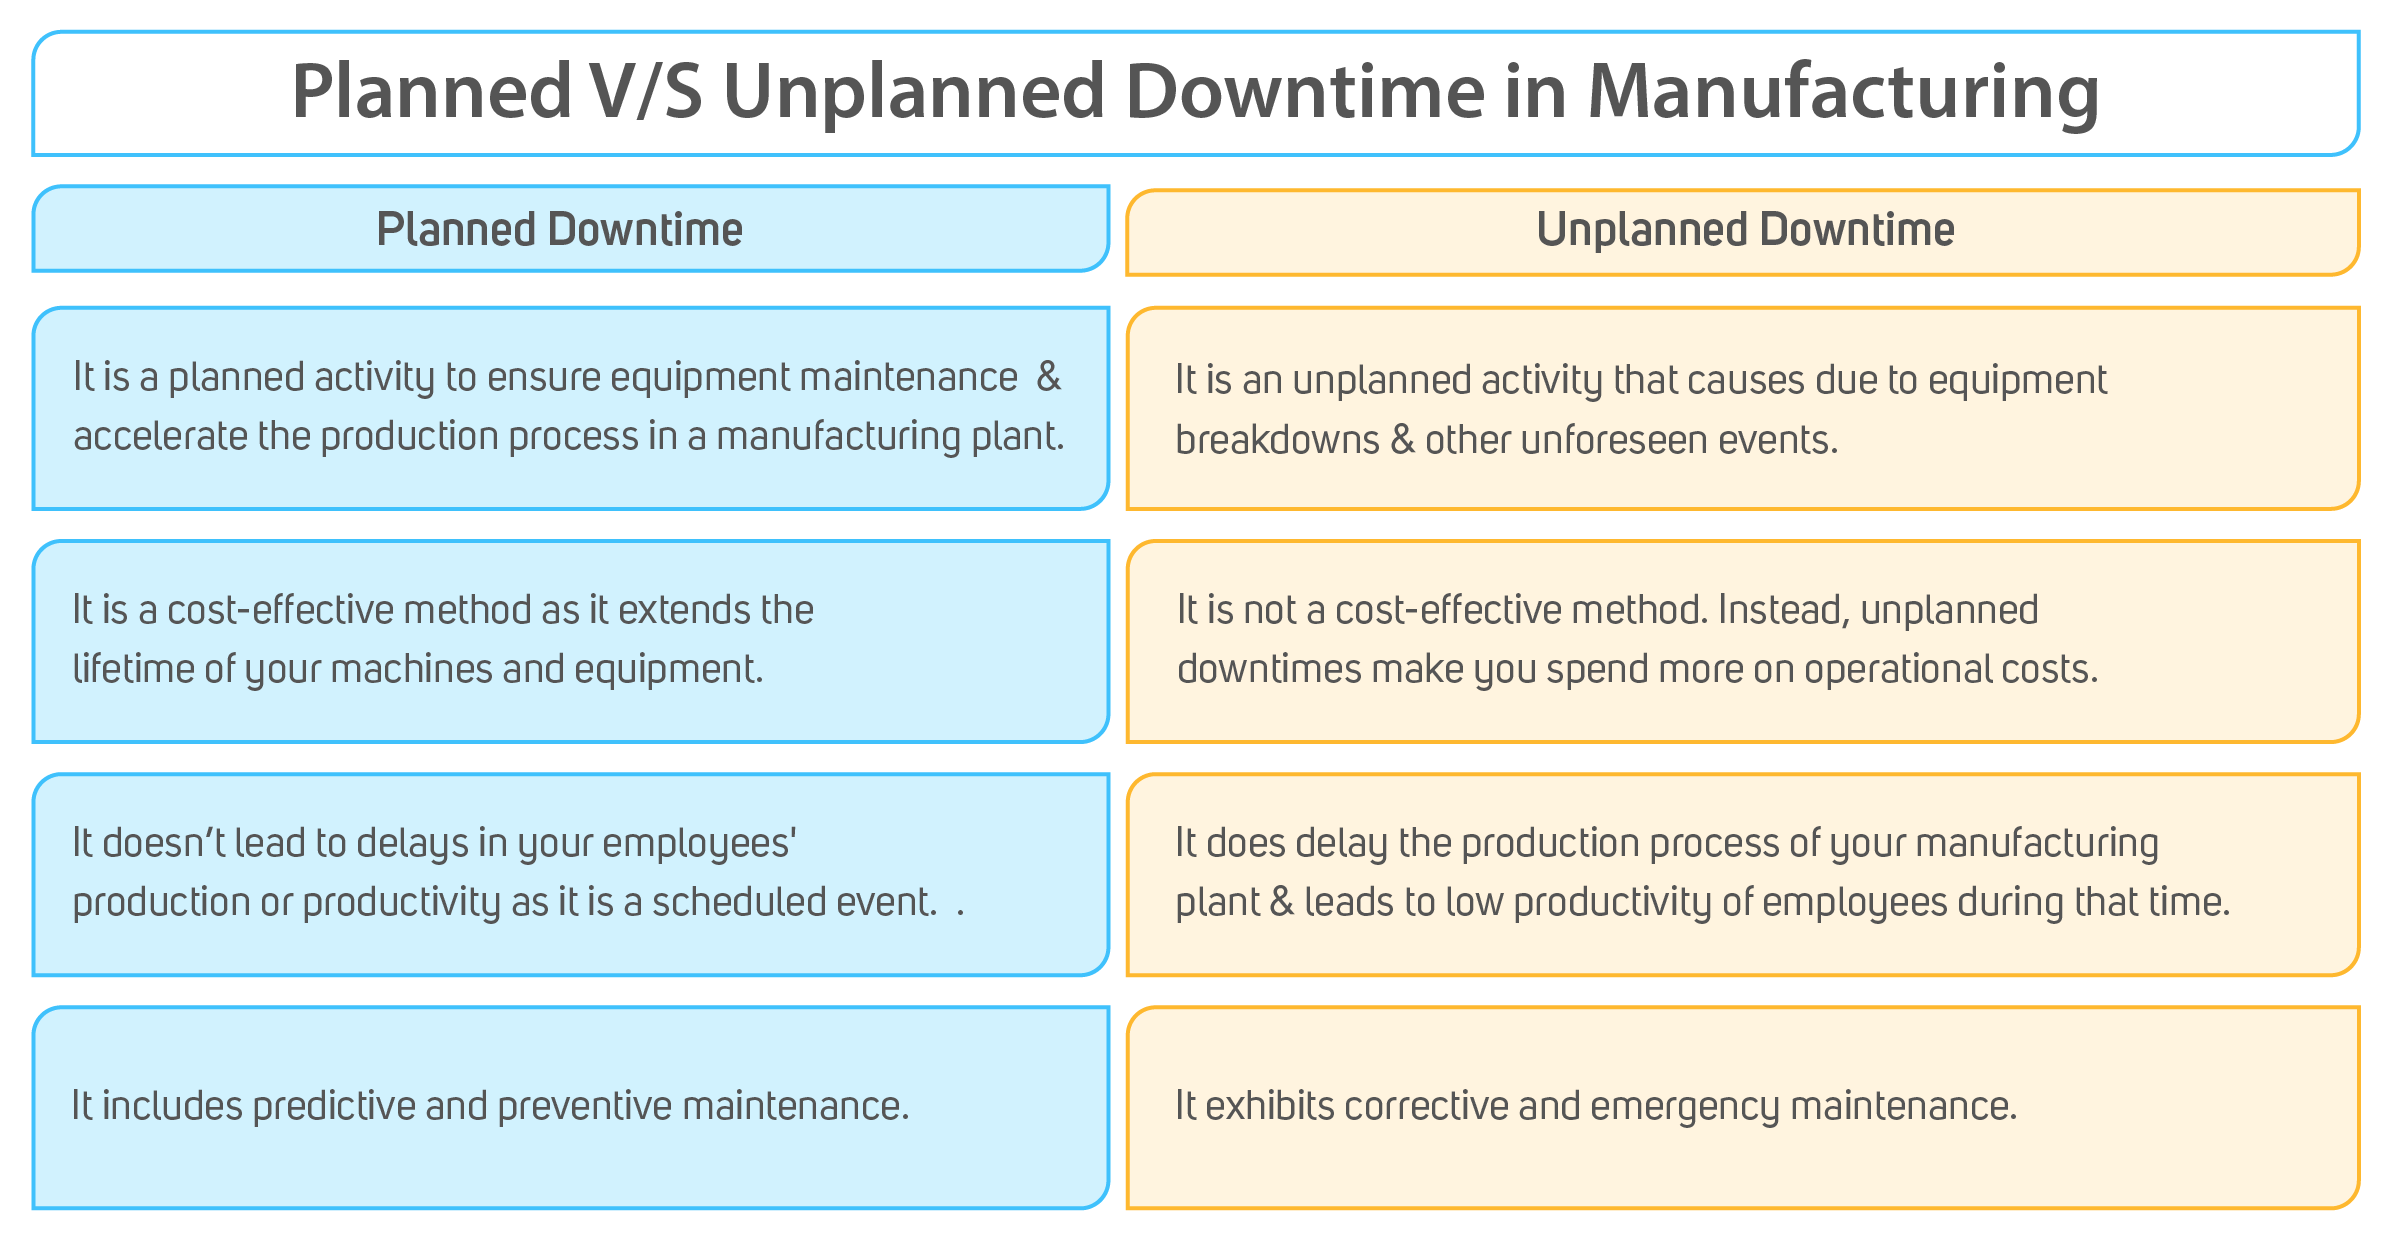 planned v/s unplanned downtime